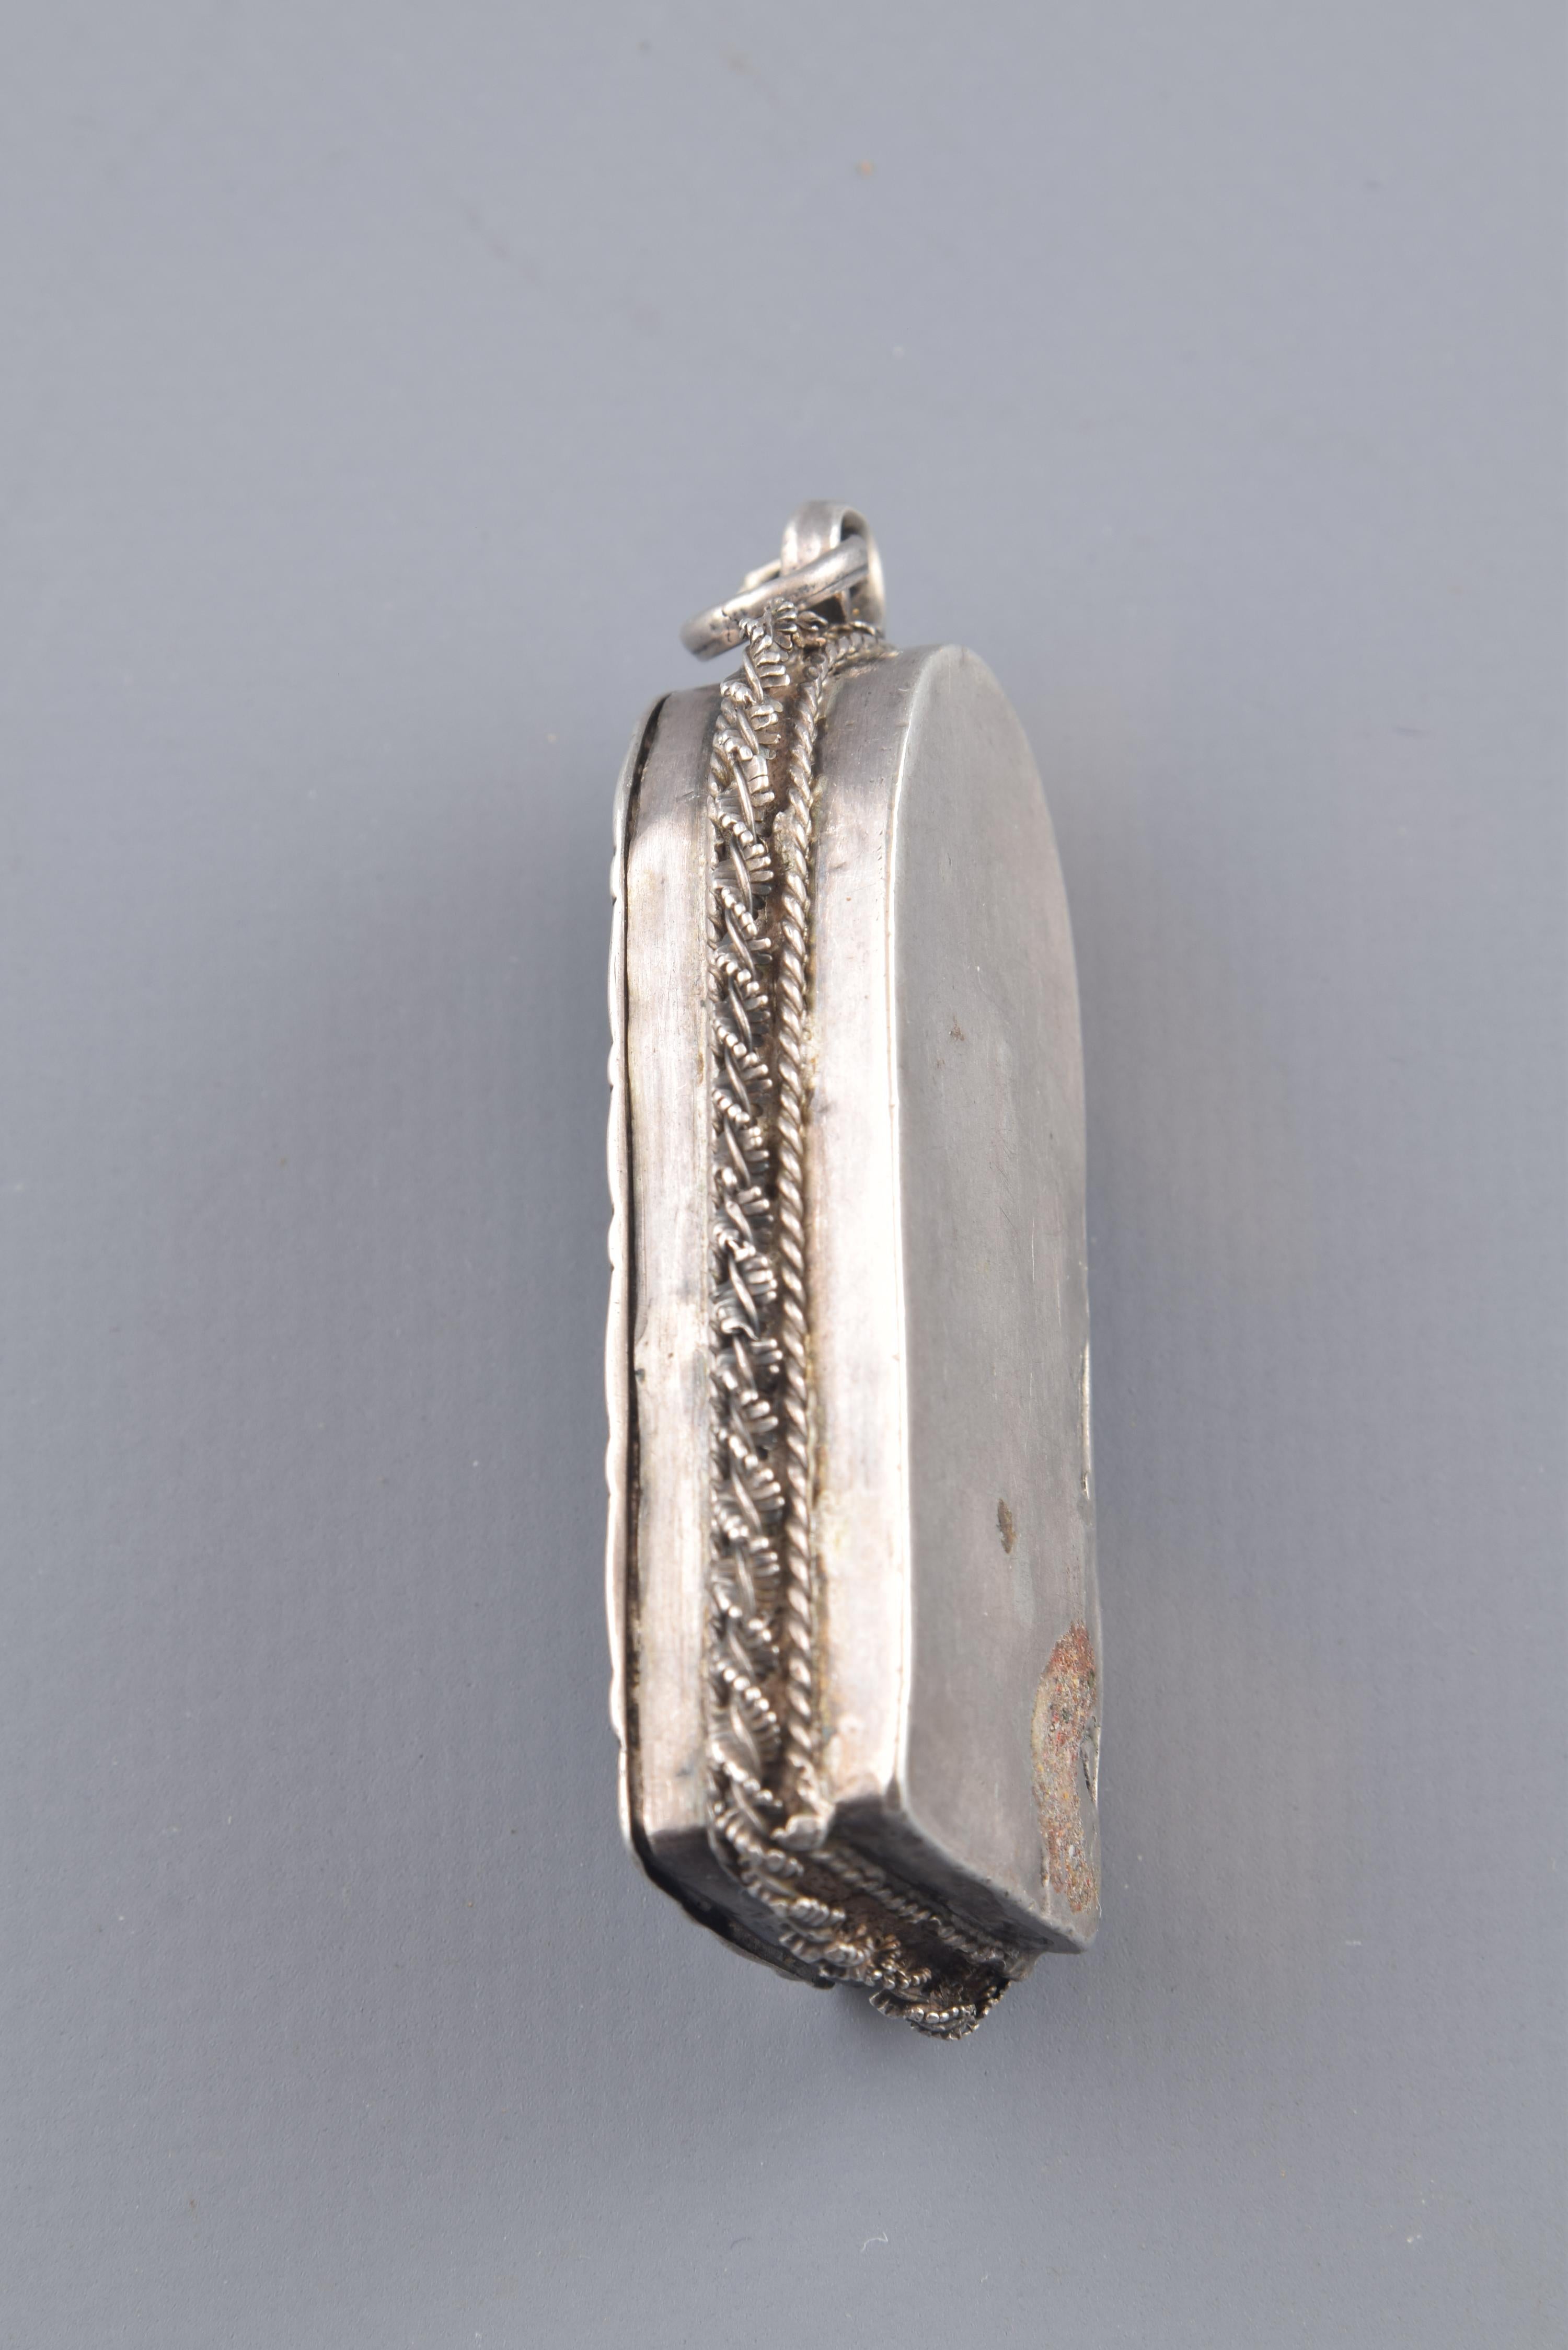 A devotional pendant in the shape of a chapel or altar, rectangular rectangular topped by a semicircle on which the piece that allows hanging the jewel is placed. On the outside, it has been decorated with a series of engraved lines and with some